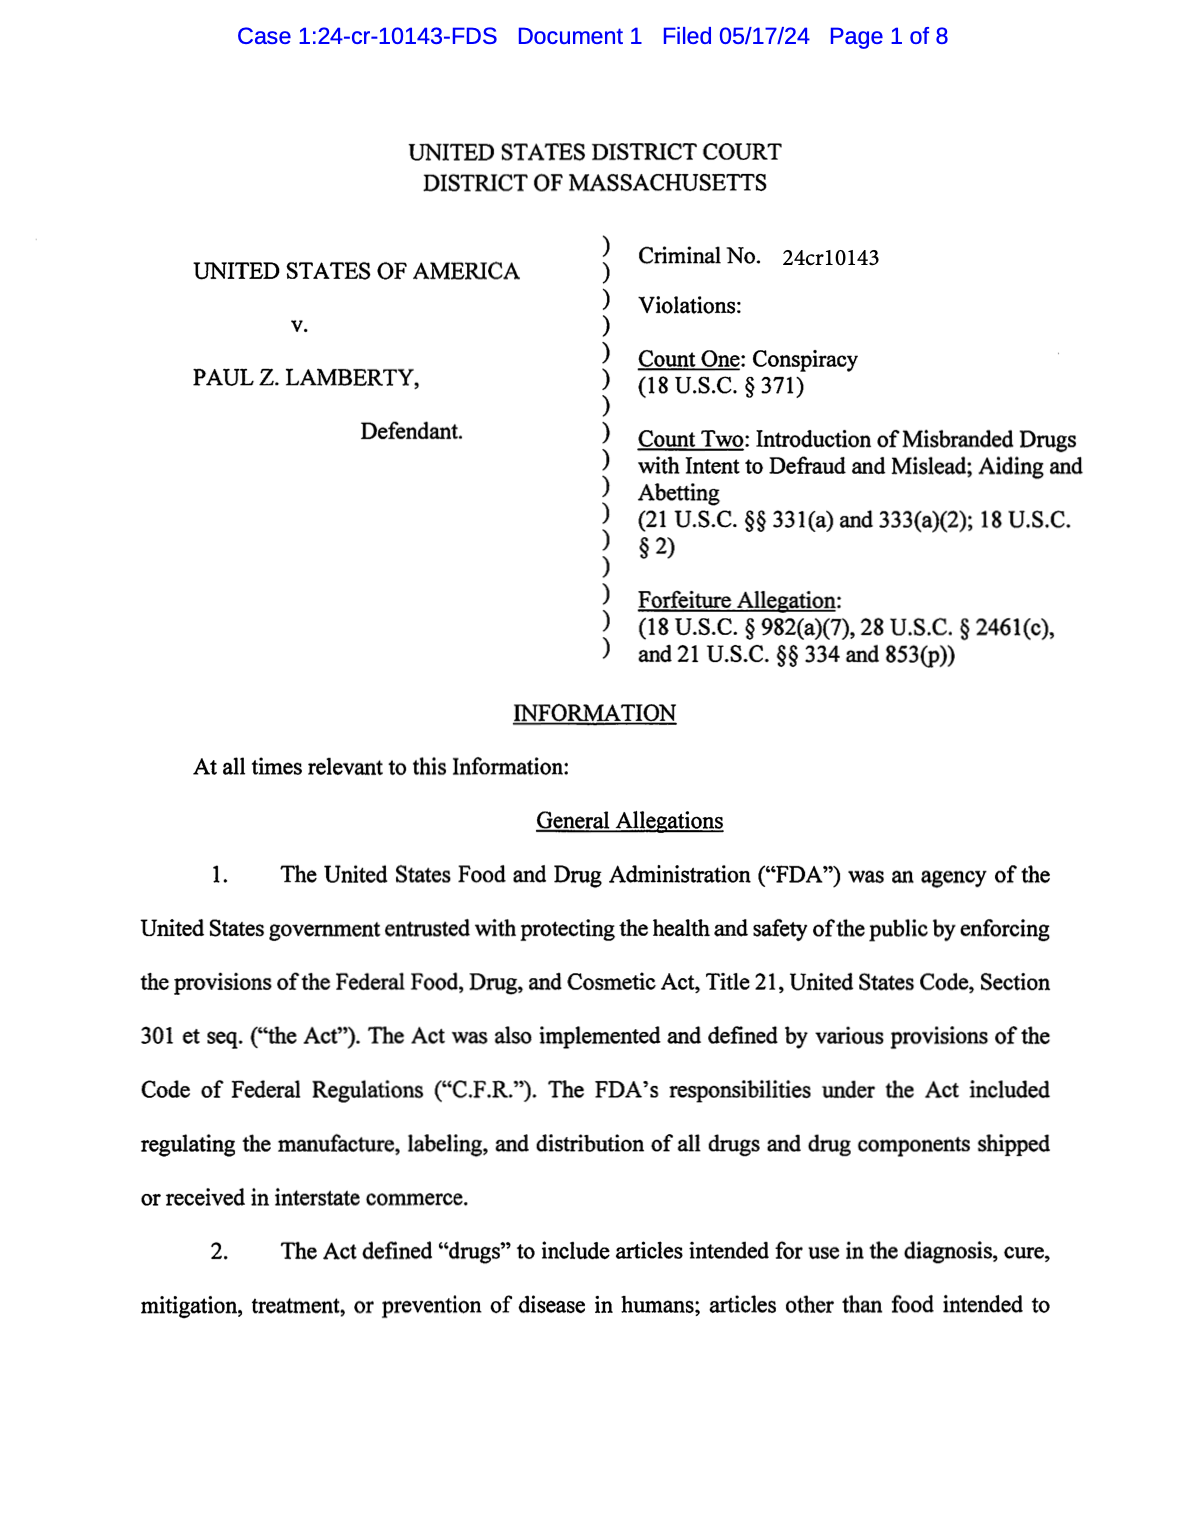 first page of the Information filed for USA v Lamberty